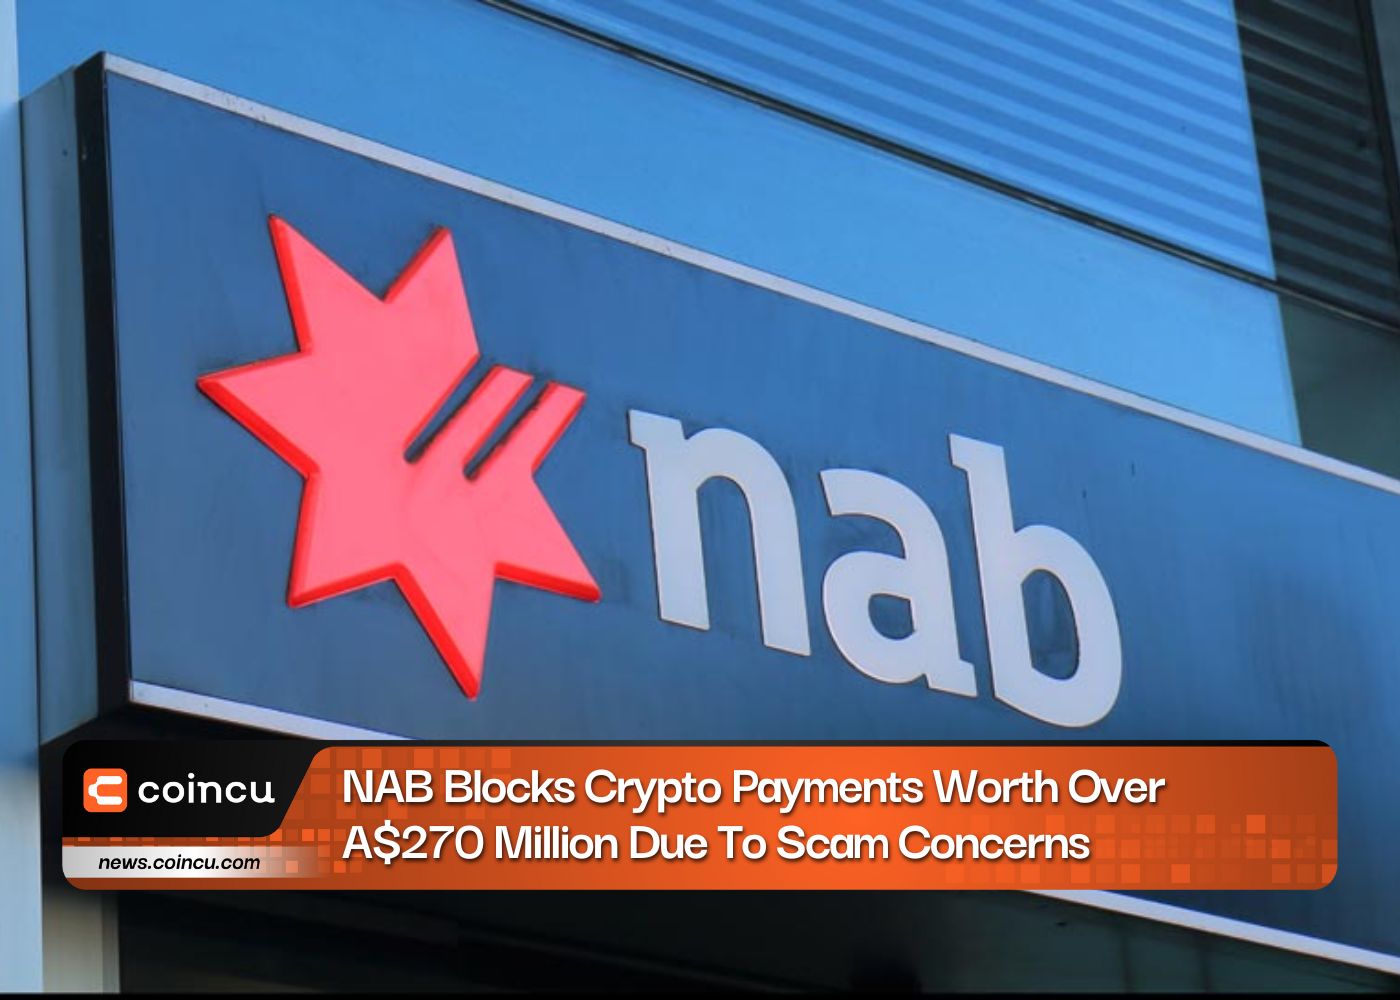 NAB Blocks Crypto Payments Worth Over A$270 Million Due To Scam Concerns